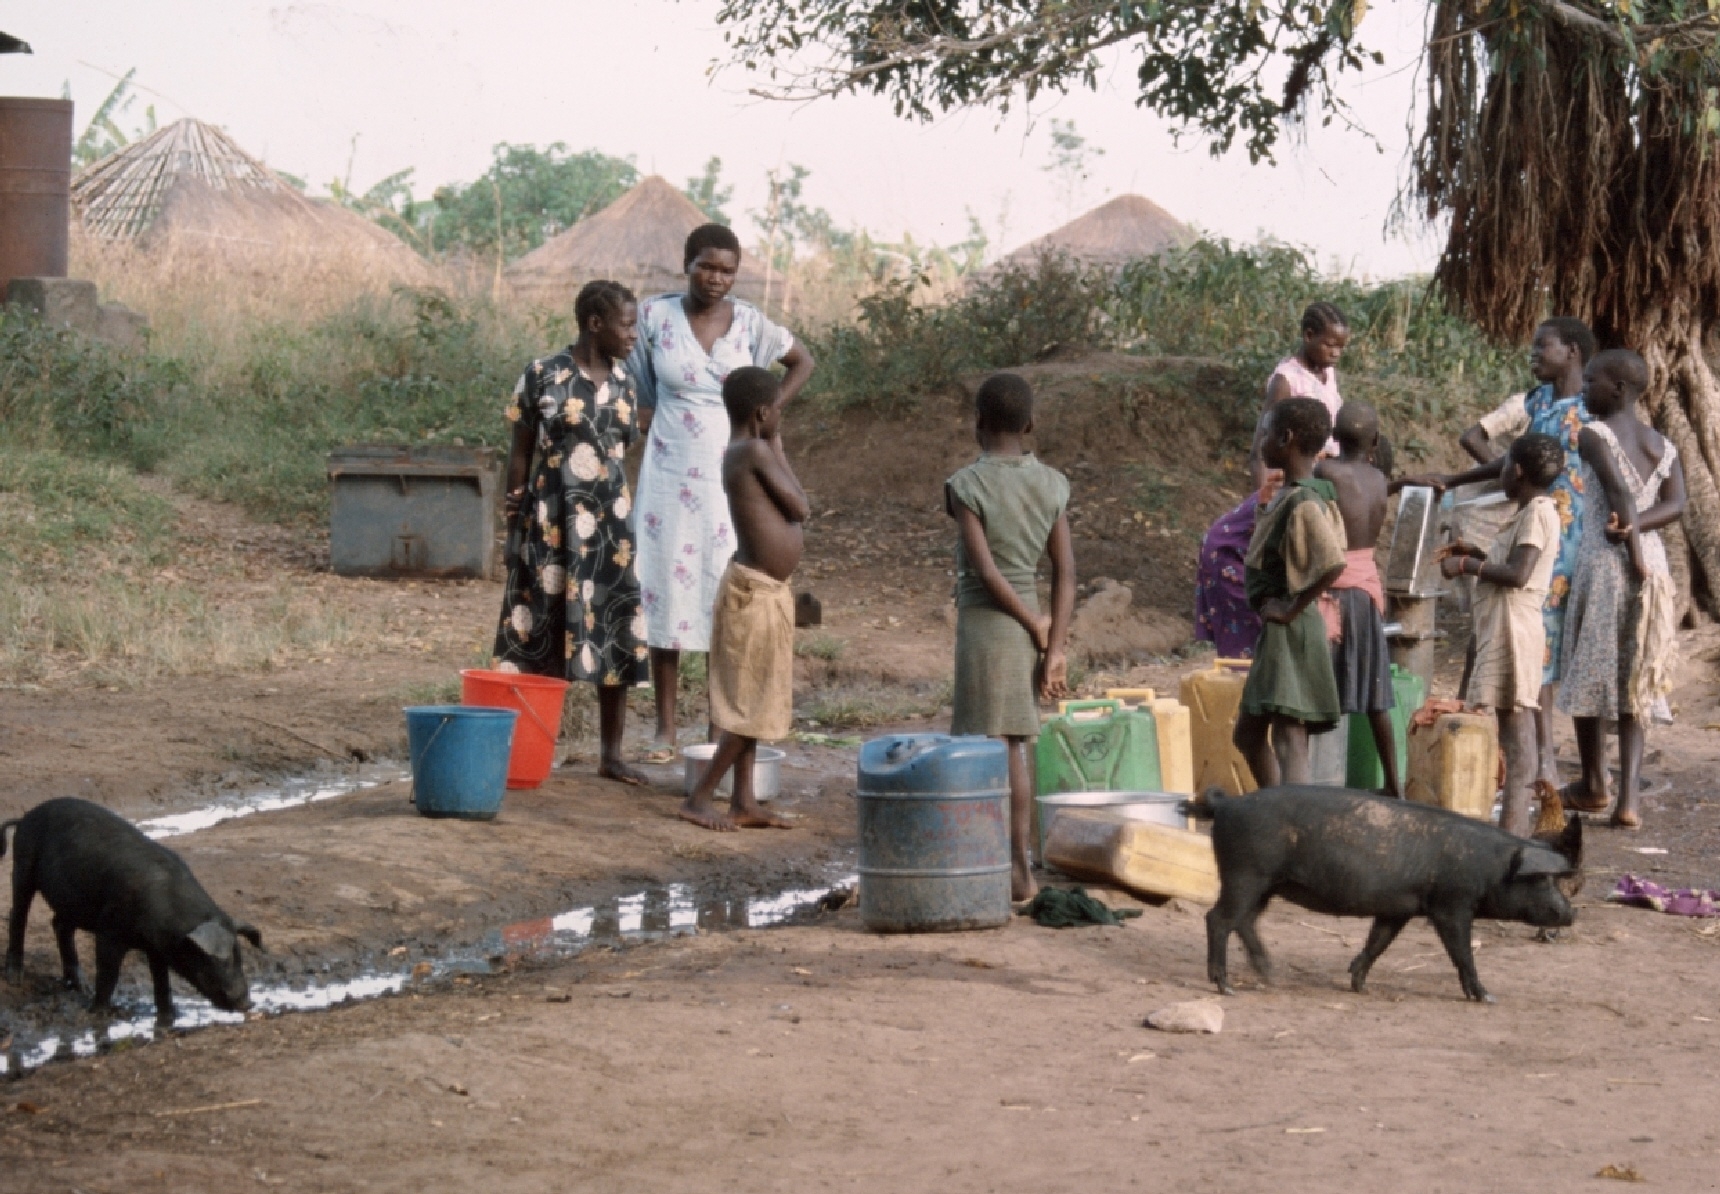 Filippo Ciantia - Bad habits, pigs allowed to move around a water pump recently provided from UNICEF